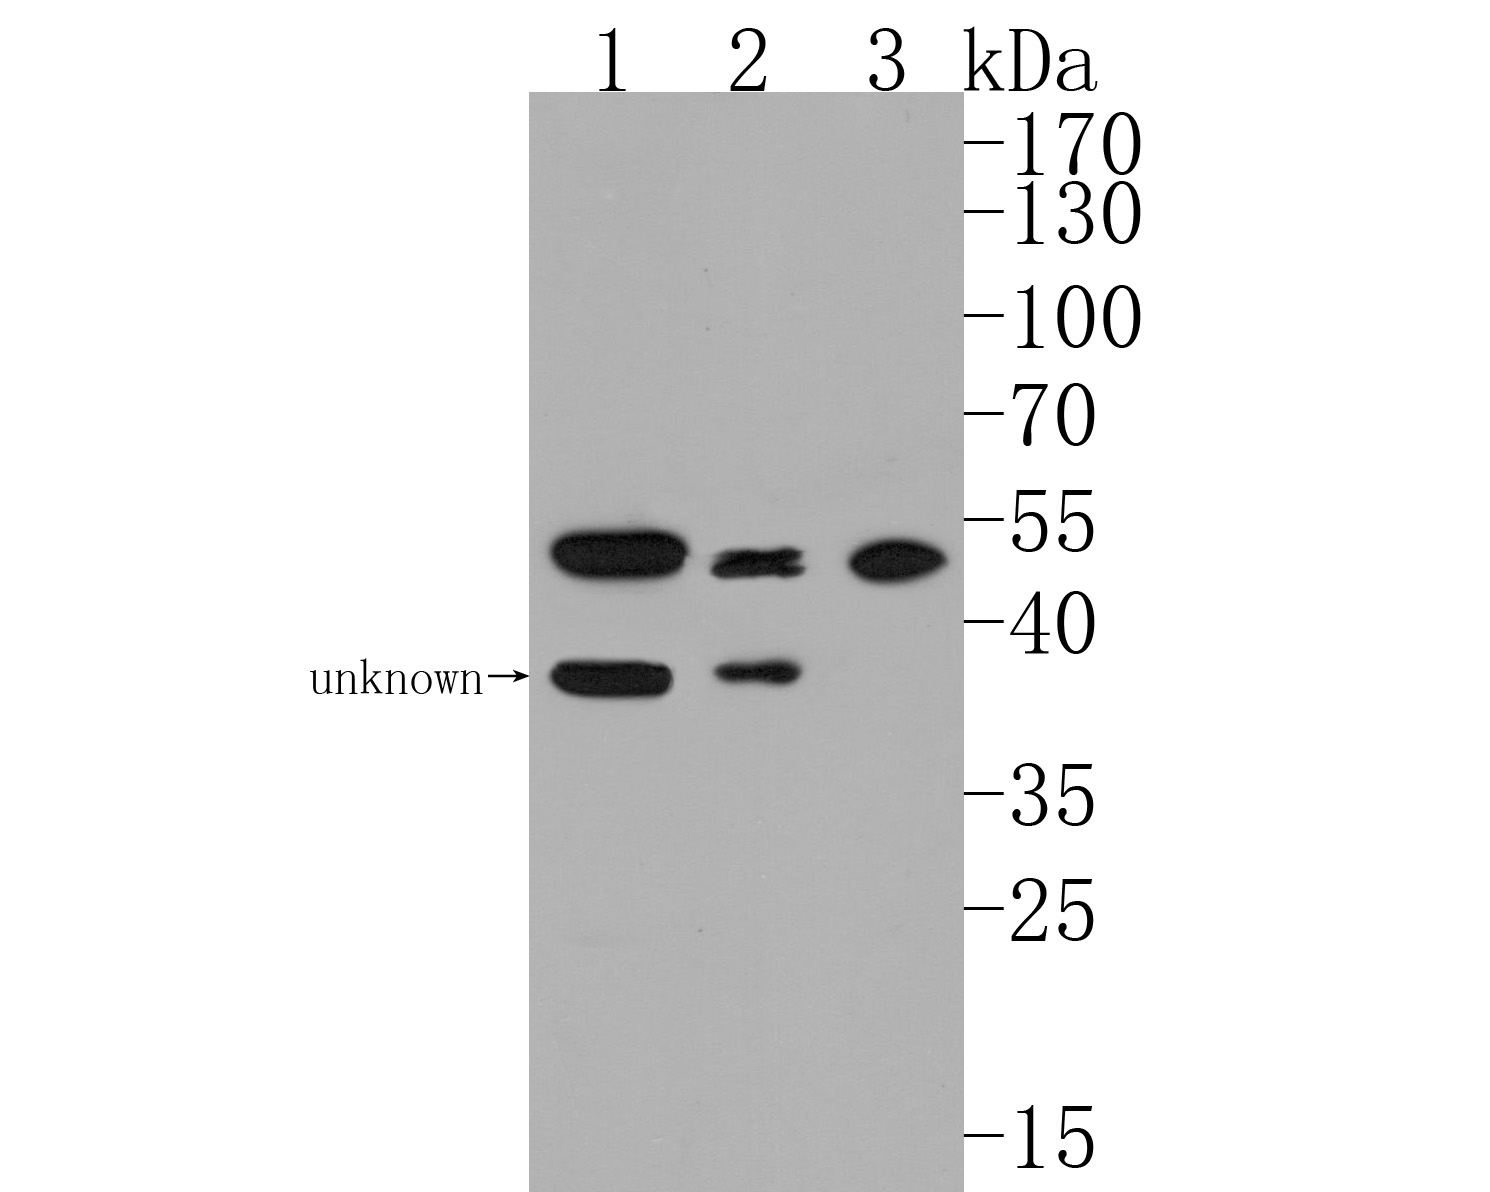 Western blot analysis of GABPA on different lysates. Proteins were transferred to a PVDF membrane and blocked with 5% BSA in PBS for 1 hour at room temperature. The primary antibody (HA500187, 1/500) was used in 5% BSA at room temperature for 2 hours. Goat Anti-Rabbit IgG - HRP Secondary Antibody (HA1001) at 1:5,000 dilution was used for 1 hour at room temperature.<br />
Positive control: <br />
Lane 1: A431 cell lysate<br />
Lane 2: Hela cell lysate<br />
Lane 3: 293T cell lysate